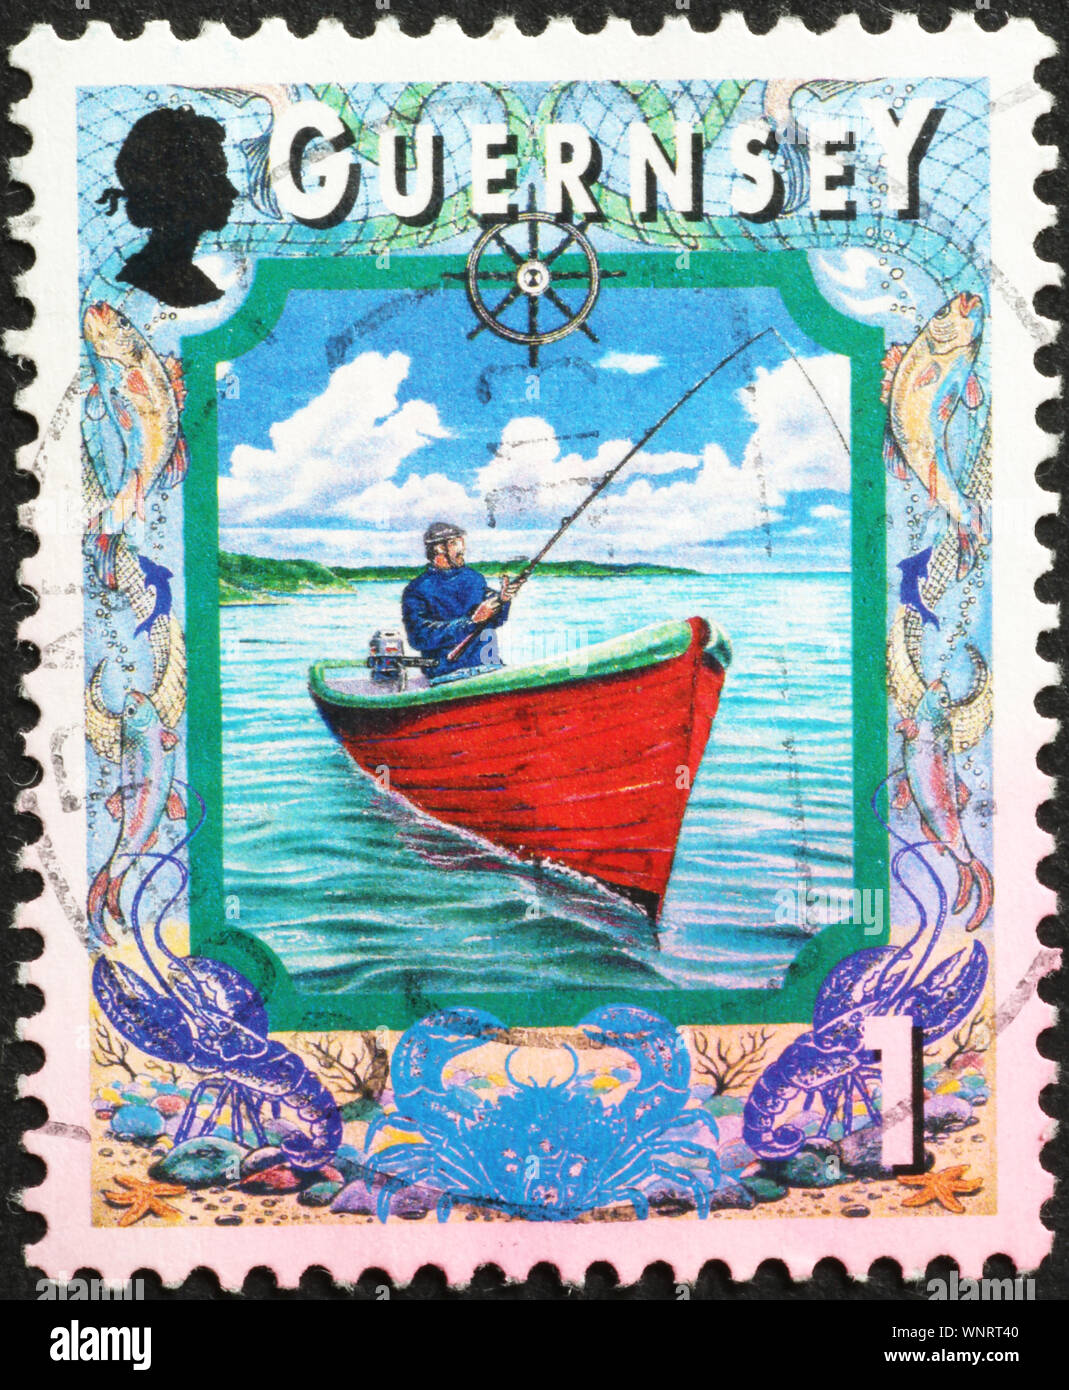 Fisherman of Guernsey on postage stamp Stock Photo